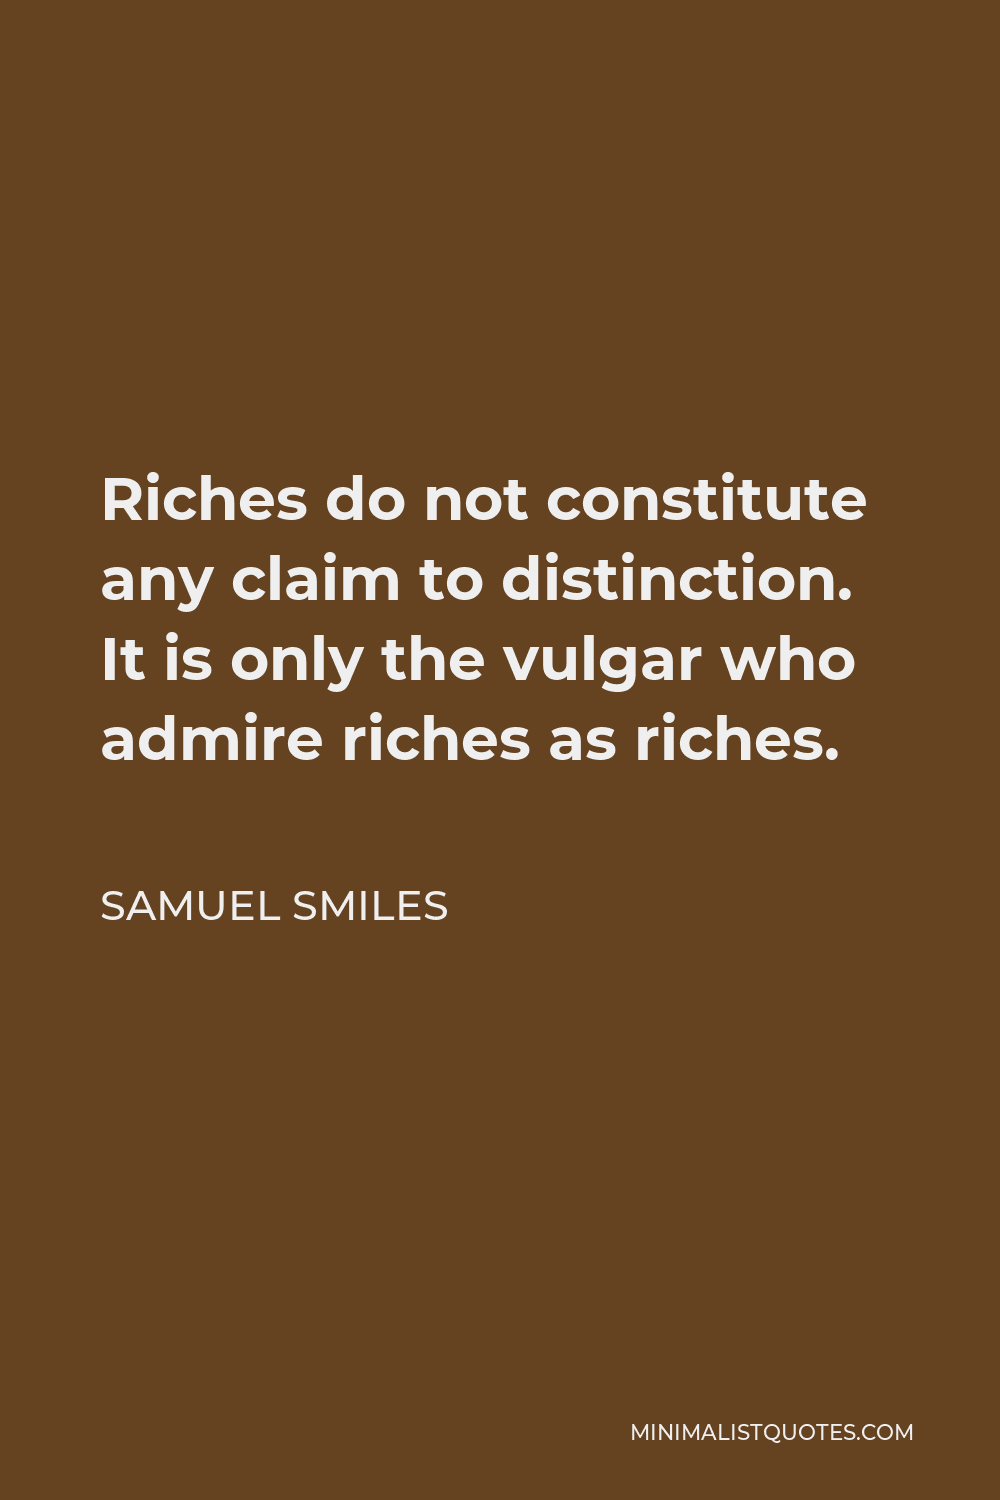 Samuel Smiles Quote - Riches do not constitute any claim to distinction. It is only the vulgar who admire riches as riches.